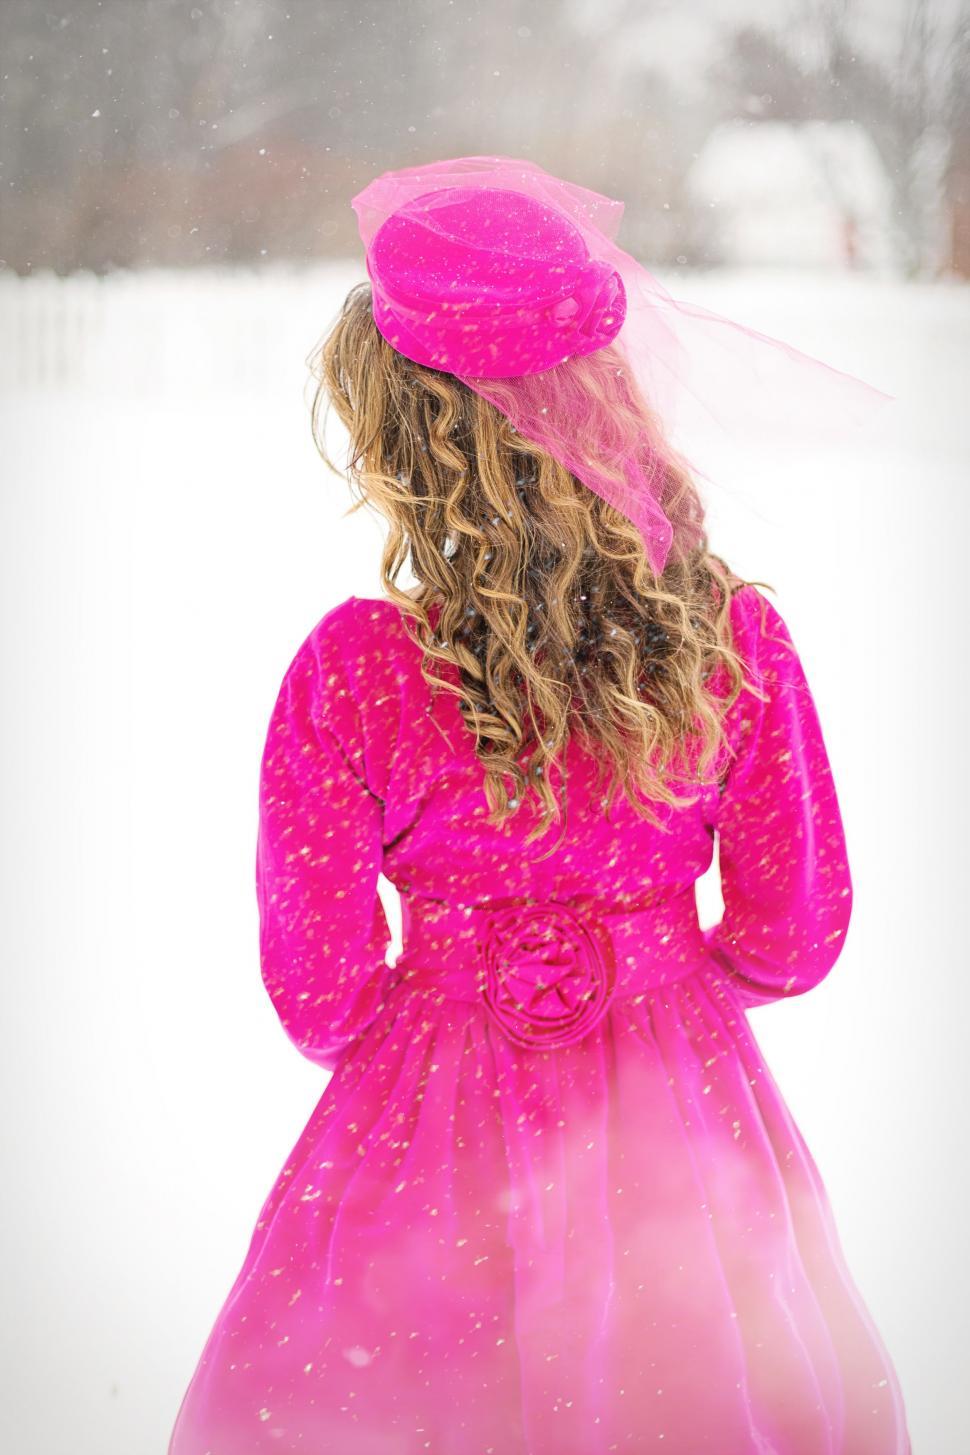 Free Image of Back view of Young Girl With Pink Hat in Snow 